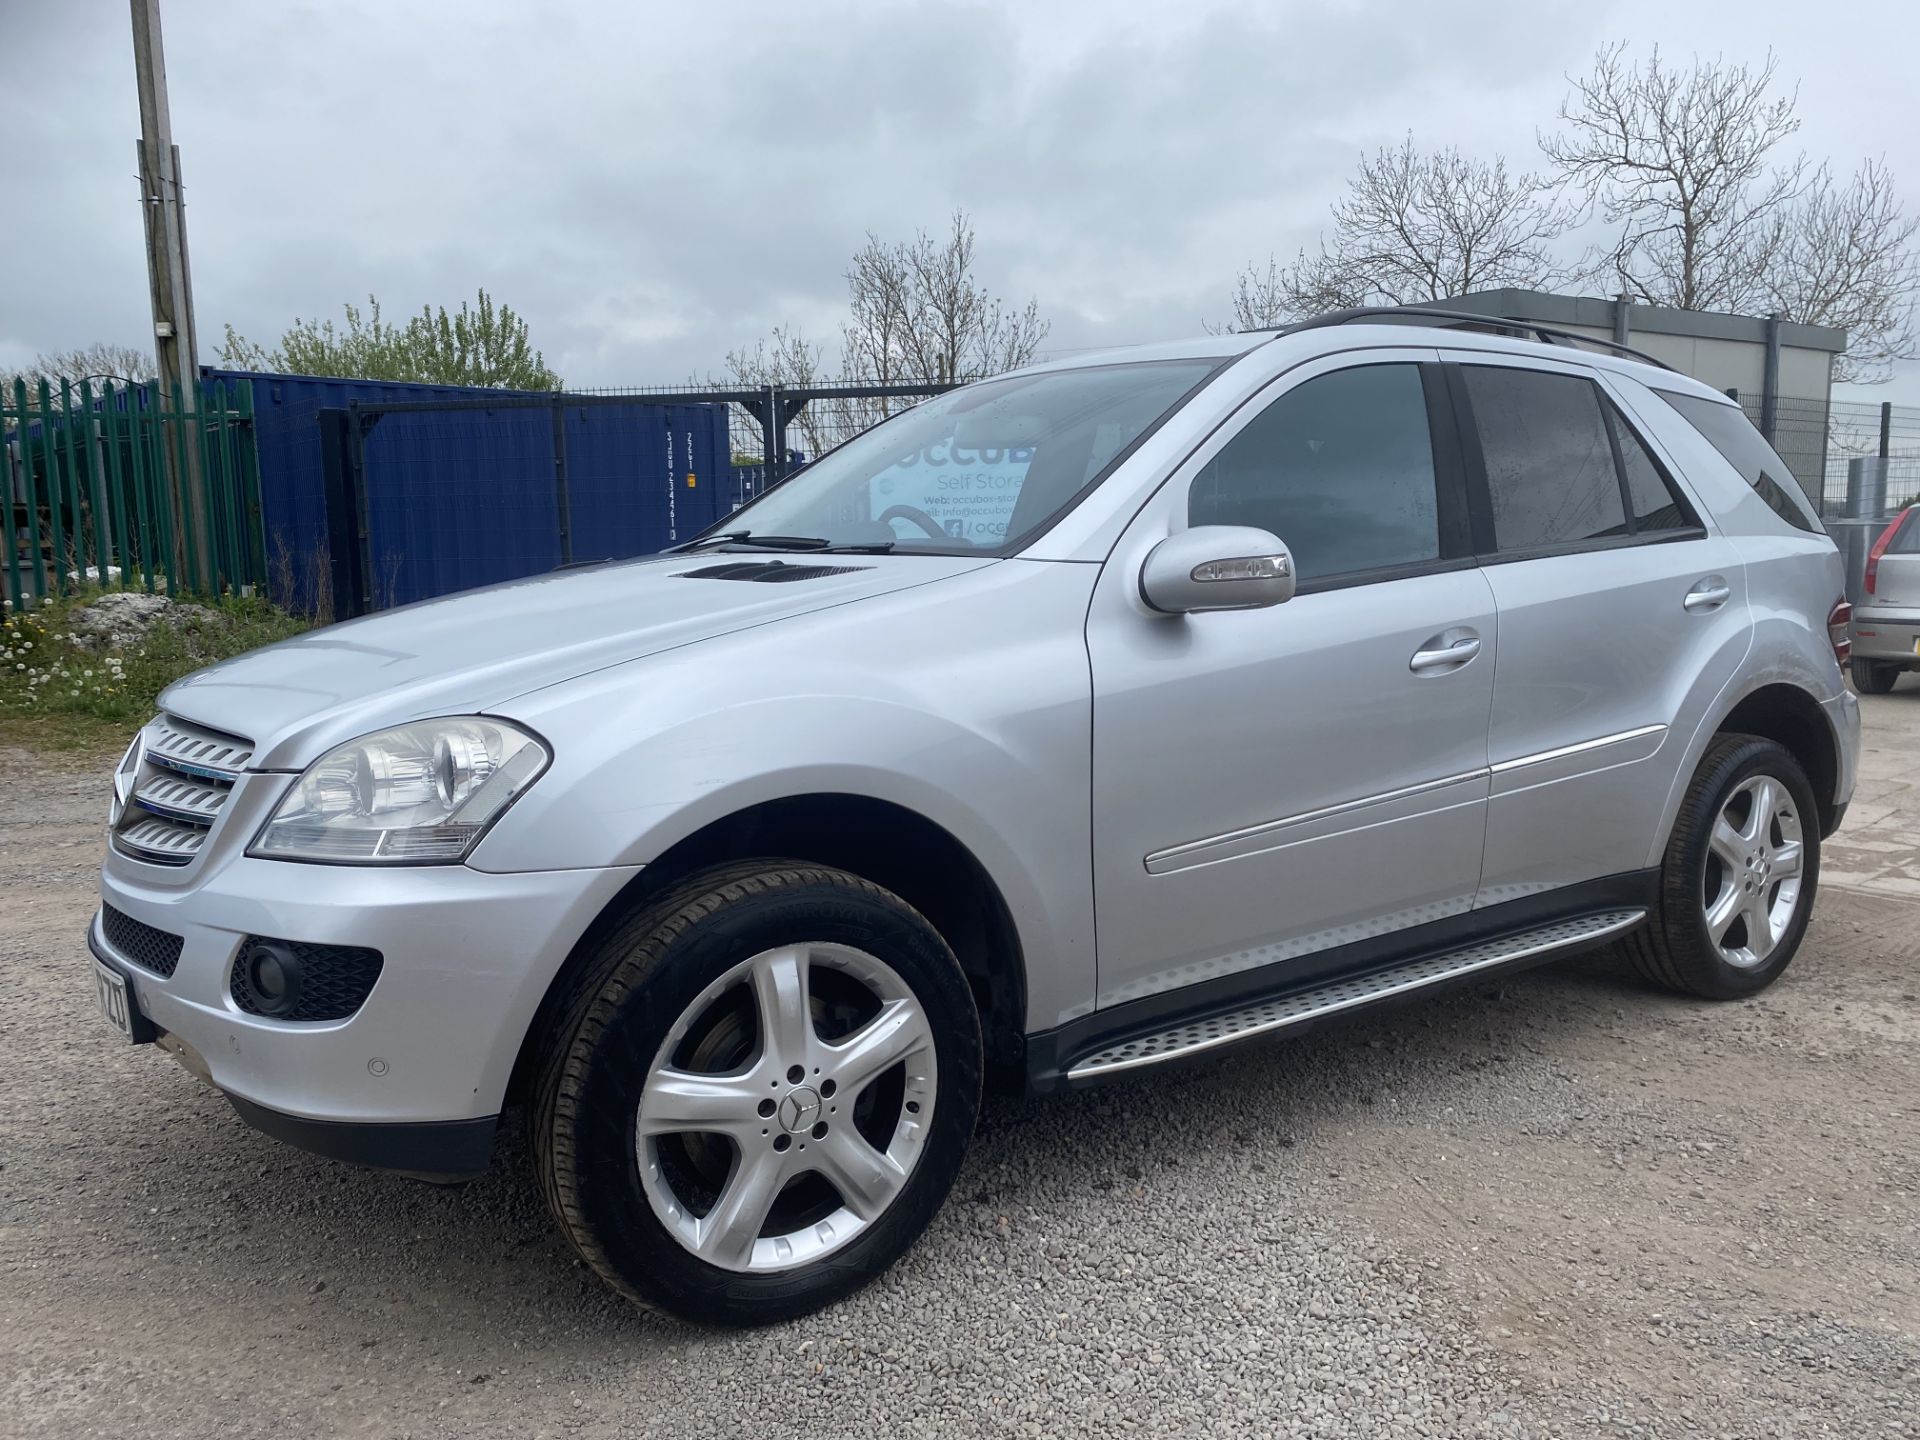 (Reserve Met) Mercedes ML280 Cdi (SPORT) Auto 3.0v6 Diesel - 2008 Reg - Only 94000 Miles Fsh Leather - Image 4 of 21